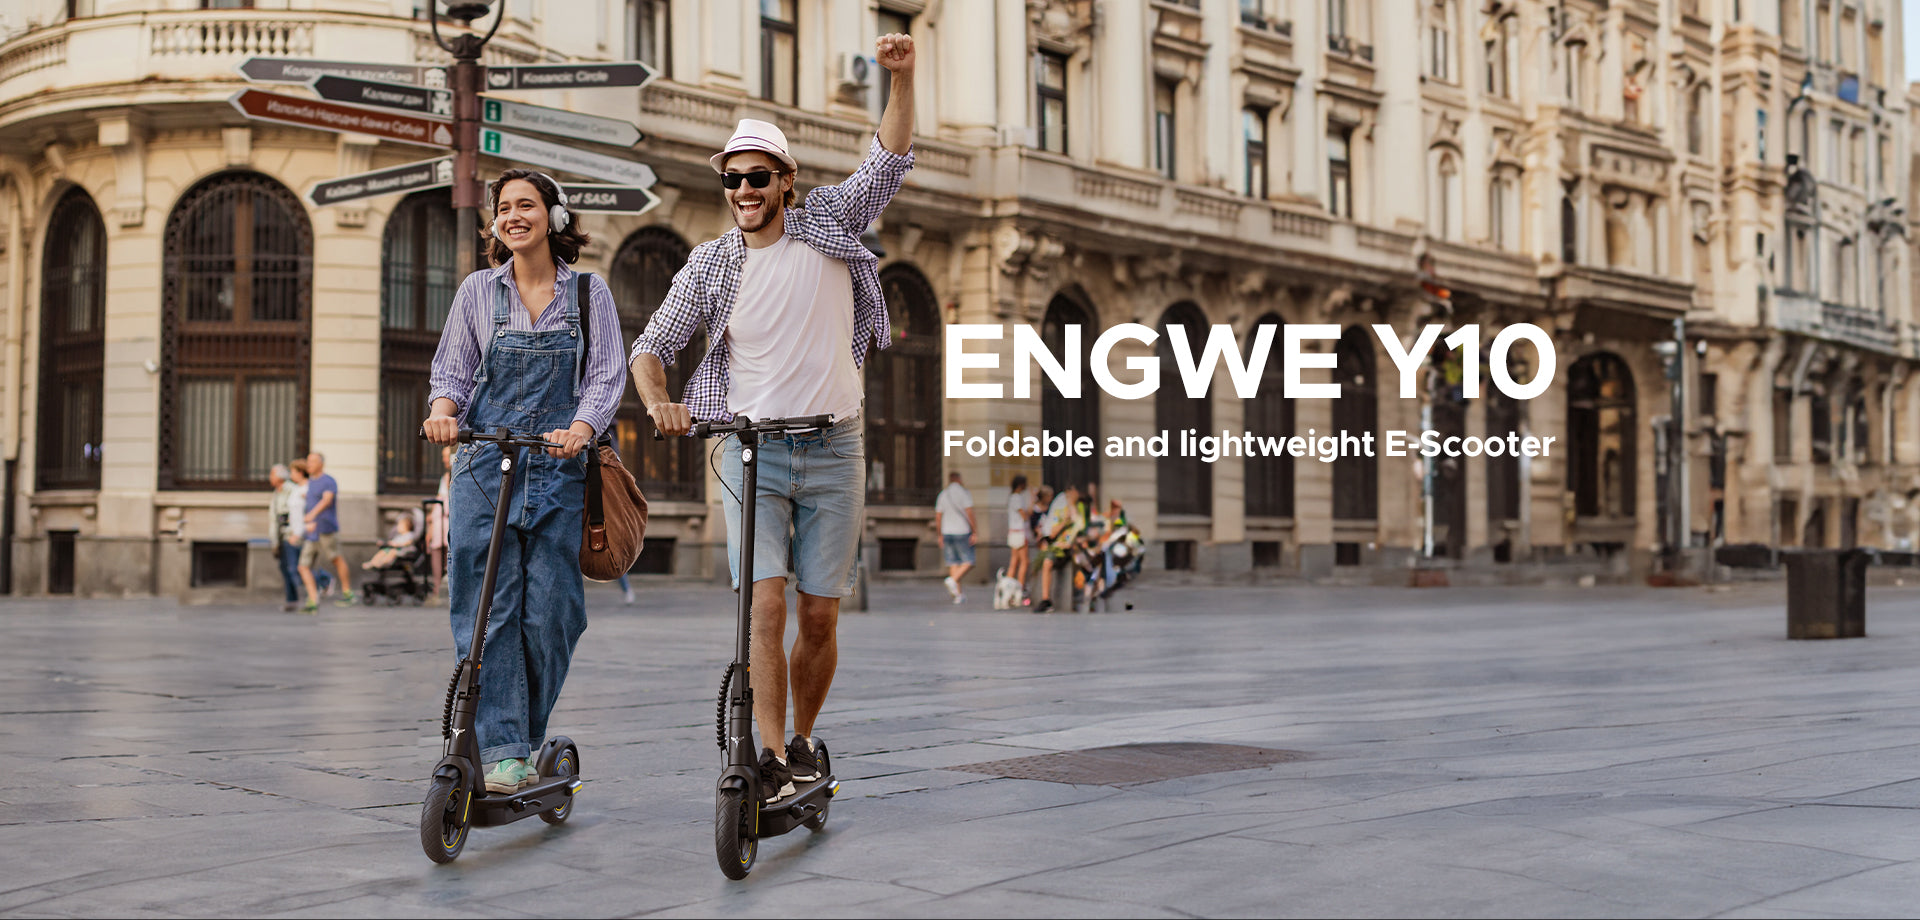 ENGWE Y10 Electric Scooter 36V 13Ah Battery 65km Range